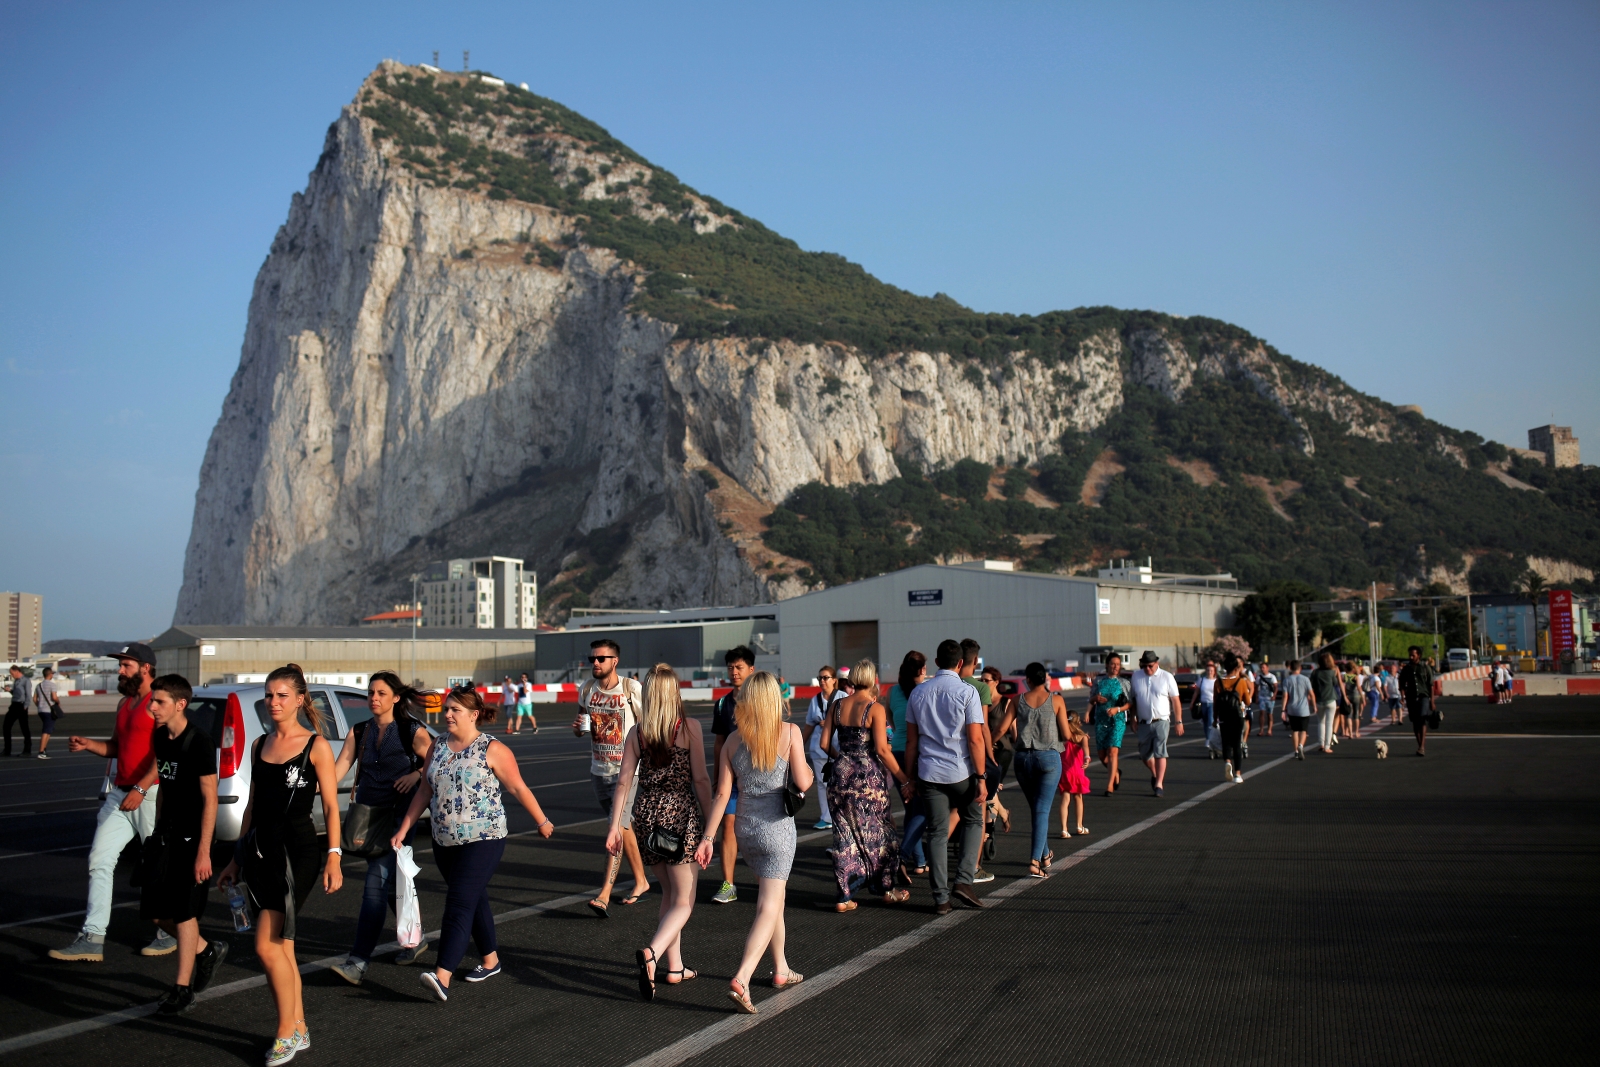 Britain snubs Spain's call for joint sovereignty over Gibraltar after Brexit1600 x 1067